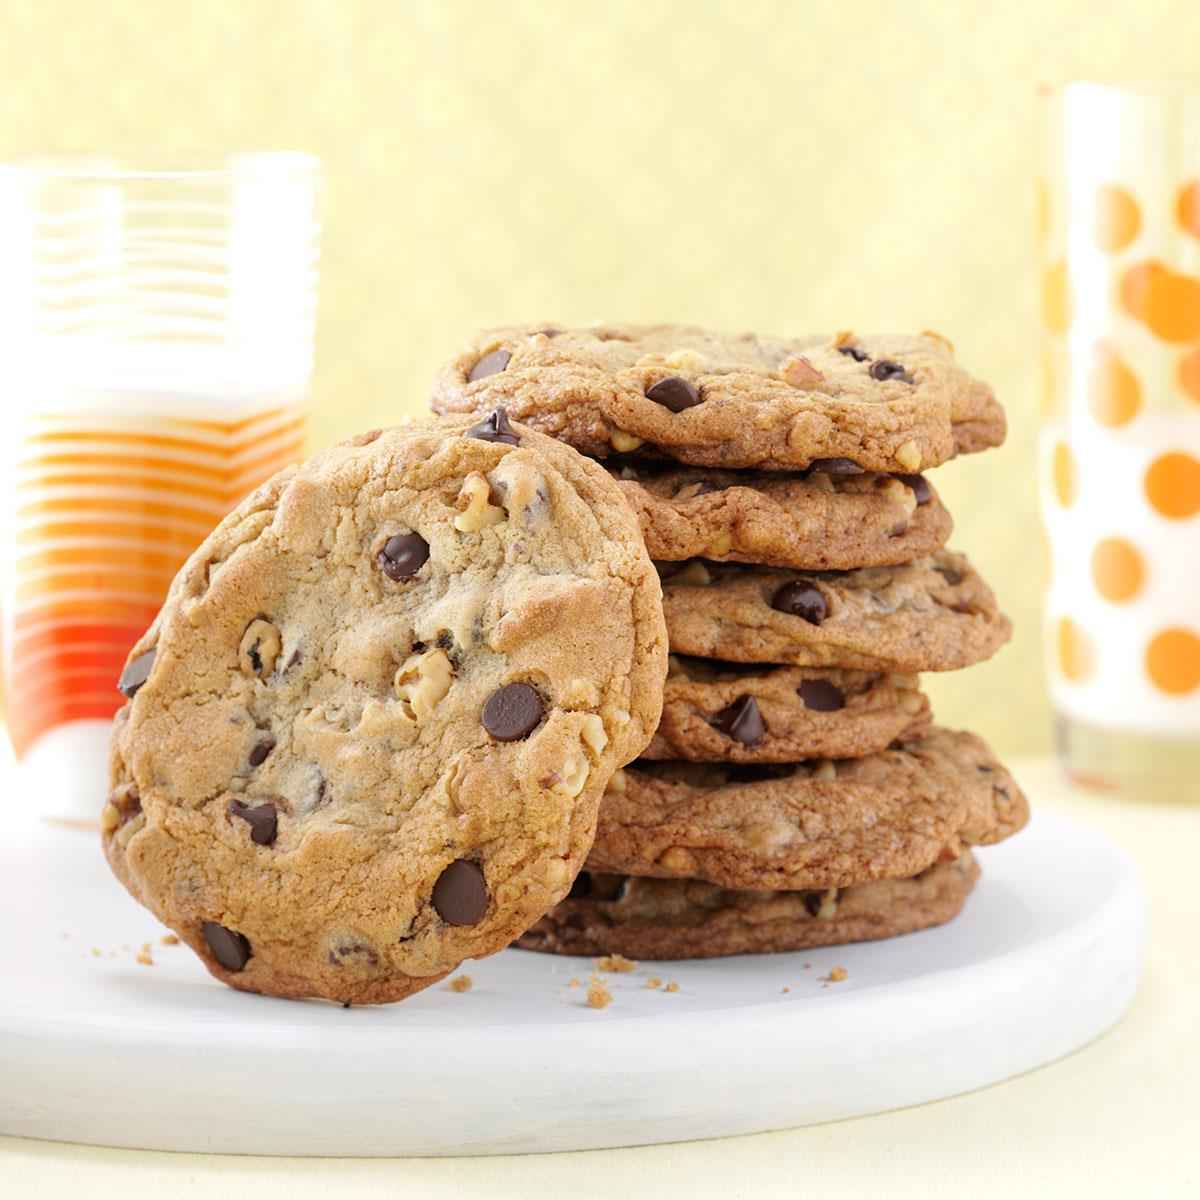 Big---Buttery-Chocolate-Chip-Cookies_exps156150_OMRR2777383A09_13_1b_RMS